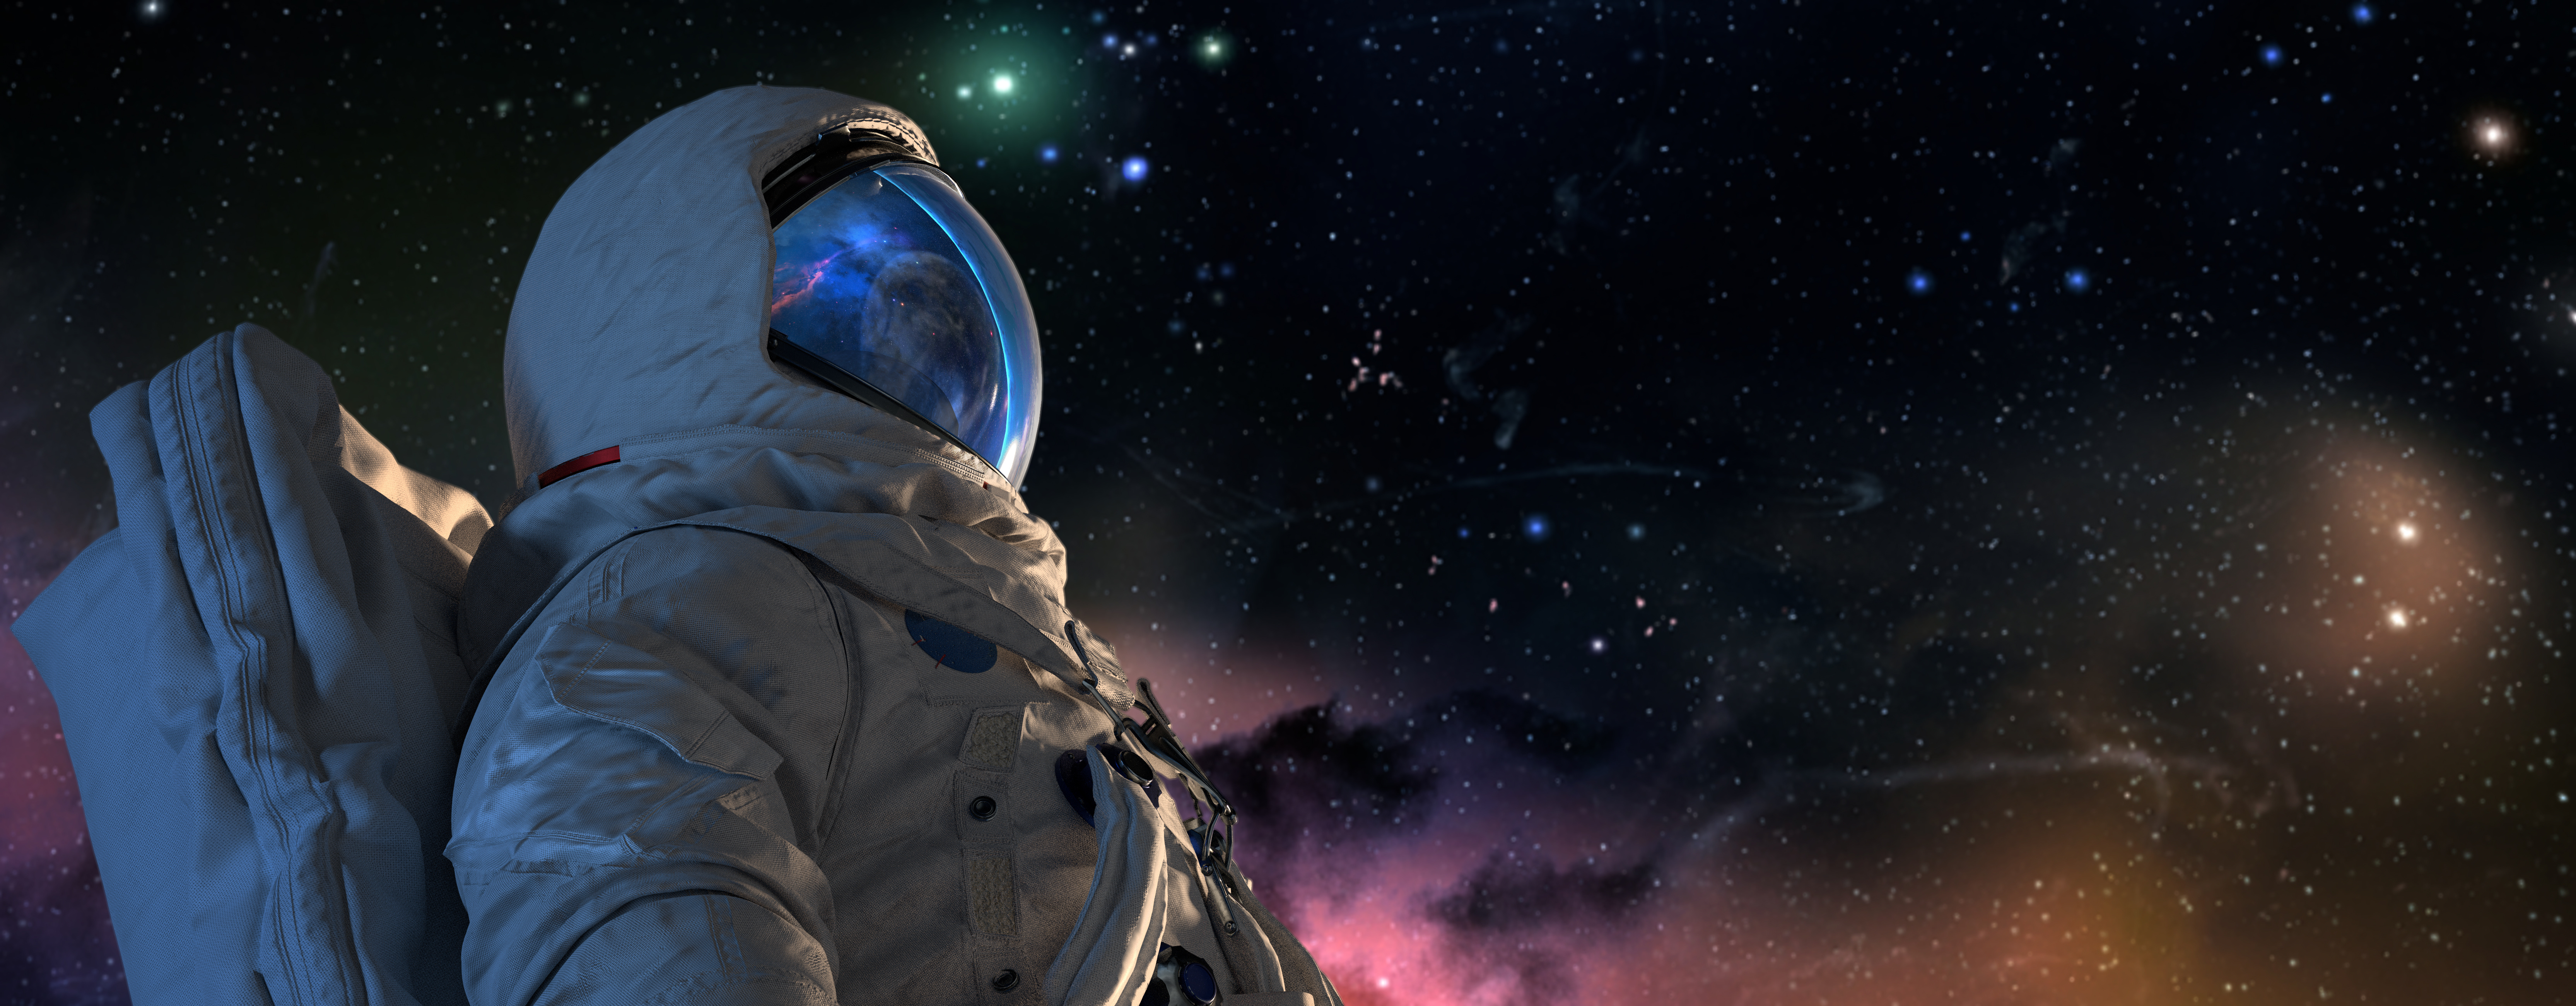 Astronaut in space with galactic background and plant earth reflection in space suit.